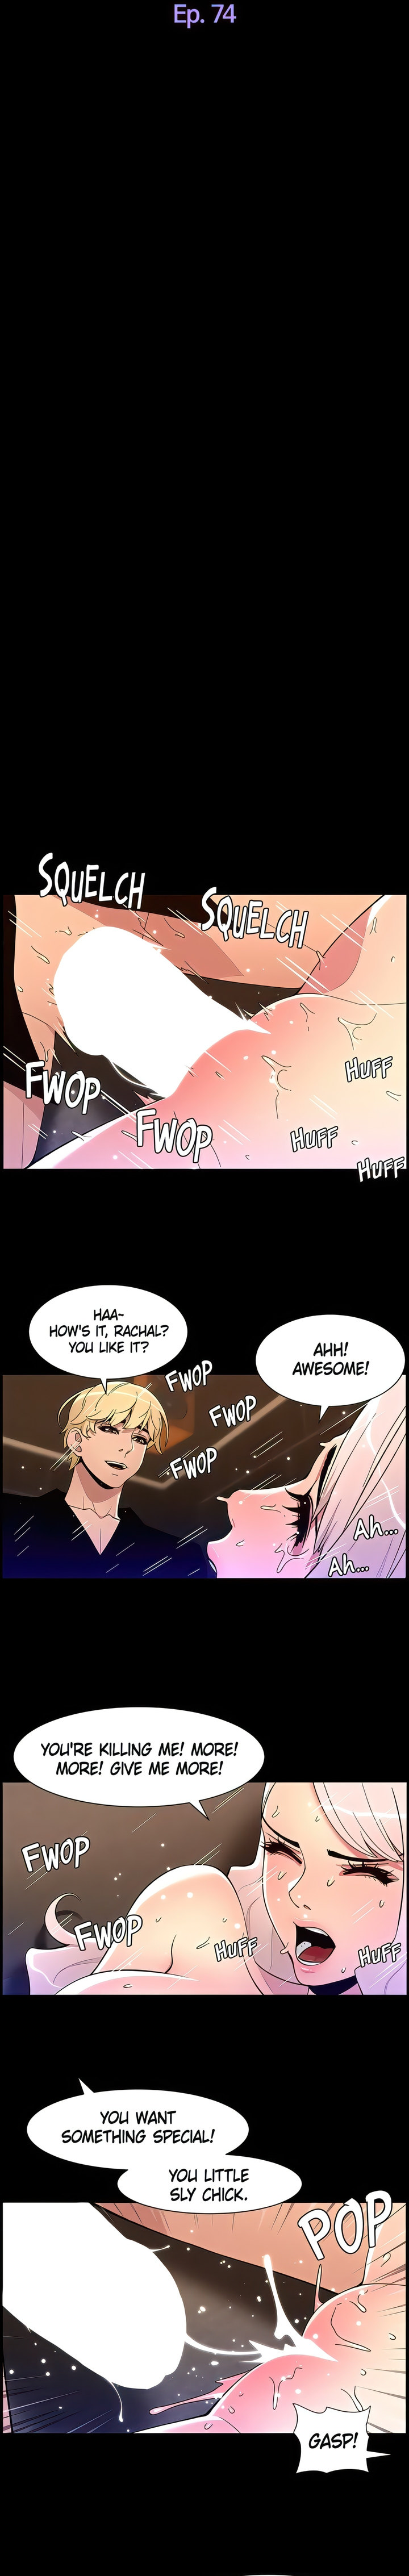 APP for the Emperor of the Night - Chapter 74 Page 3